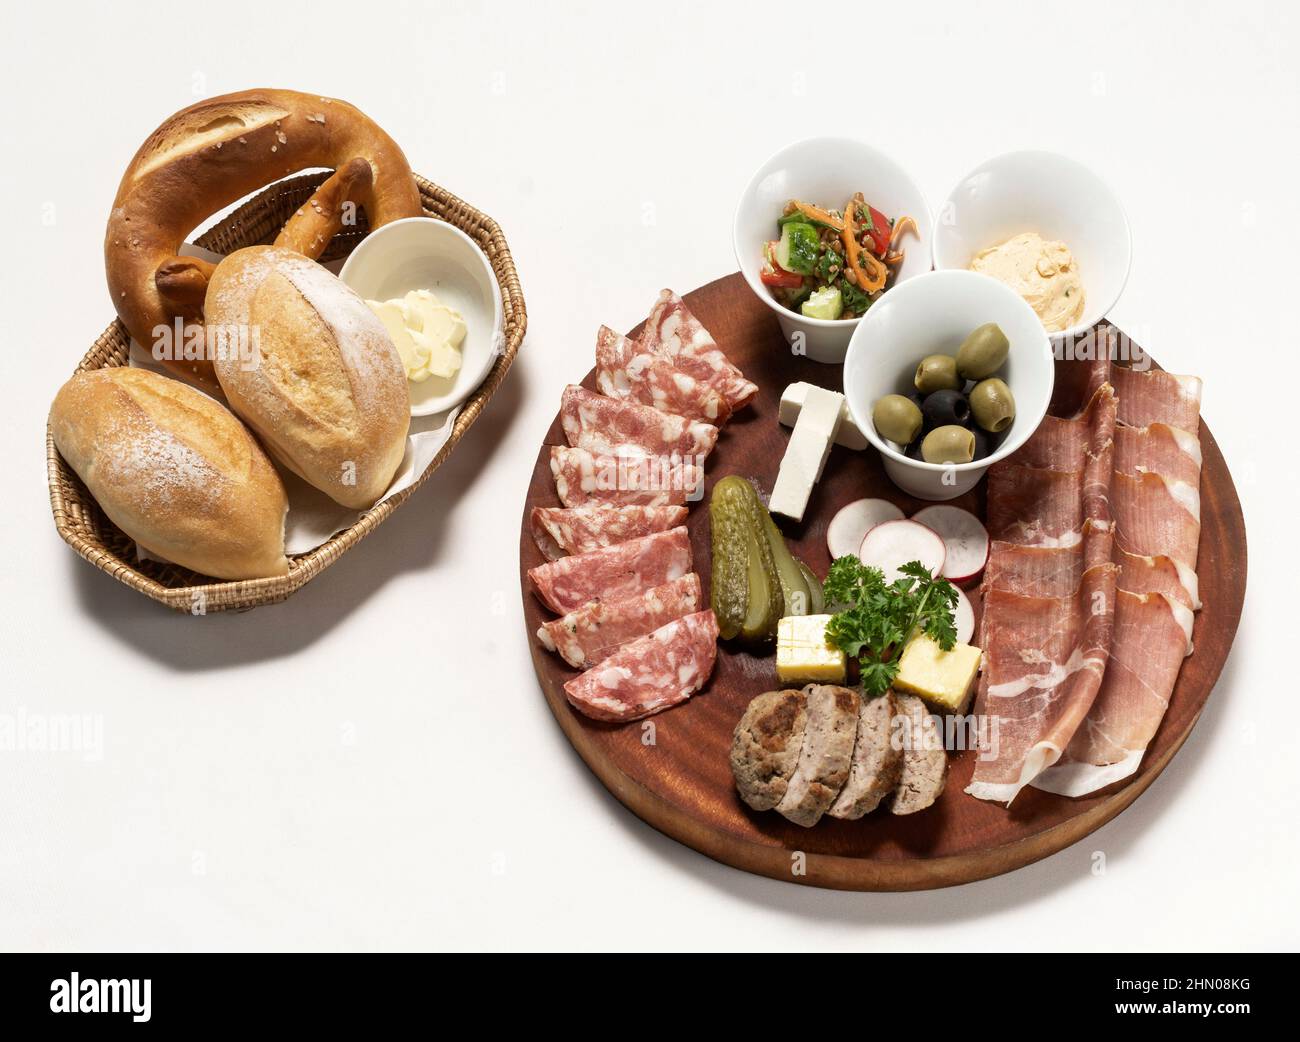 Brotzeit cold cuts meat tapas sharing platter on white background Stock Photo